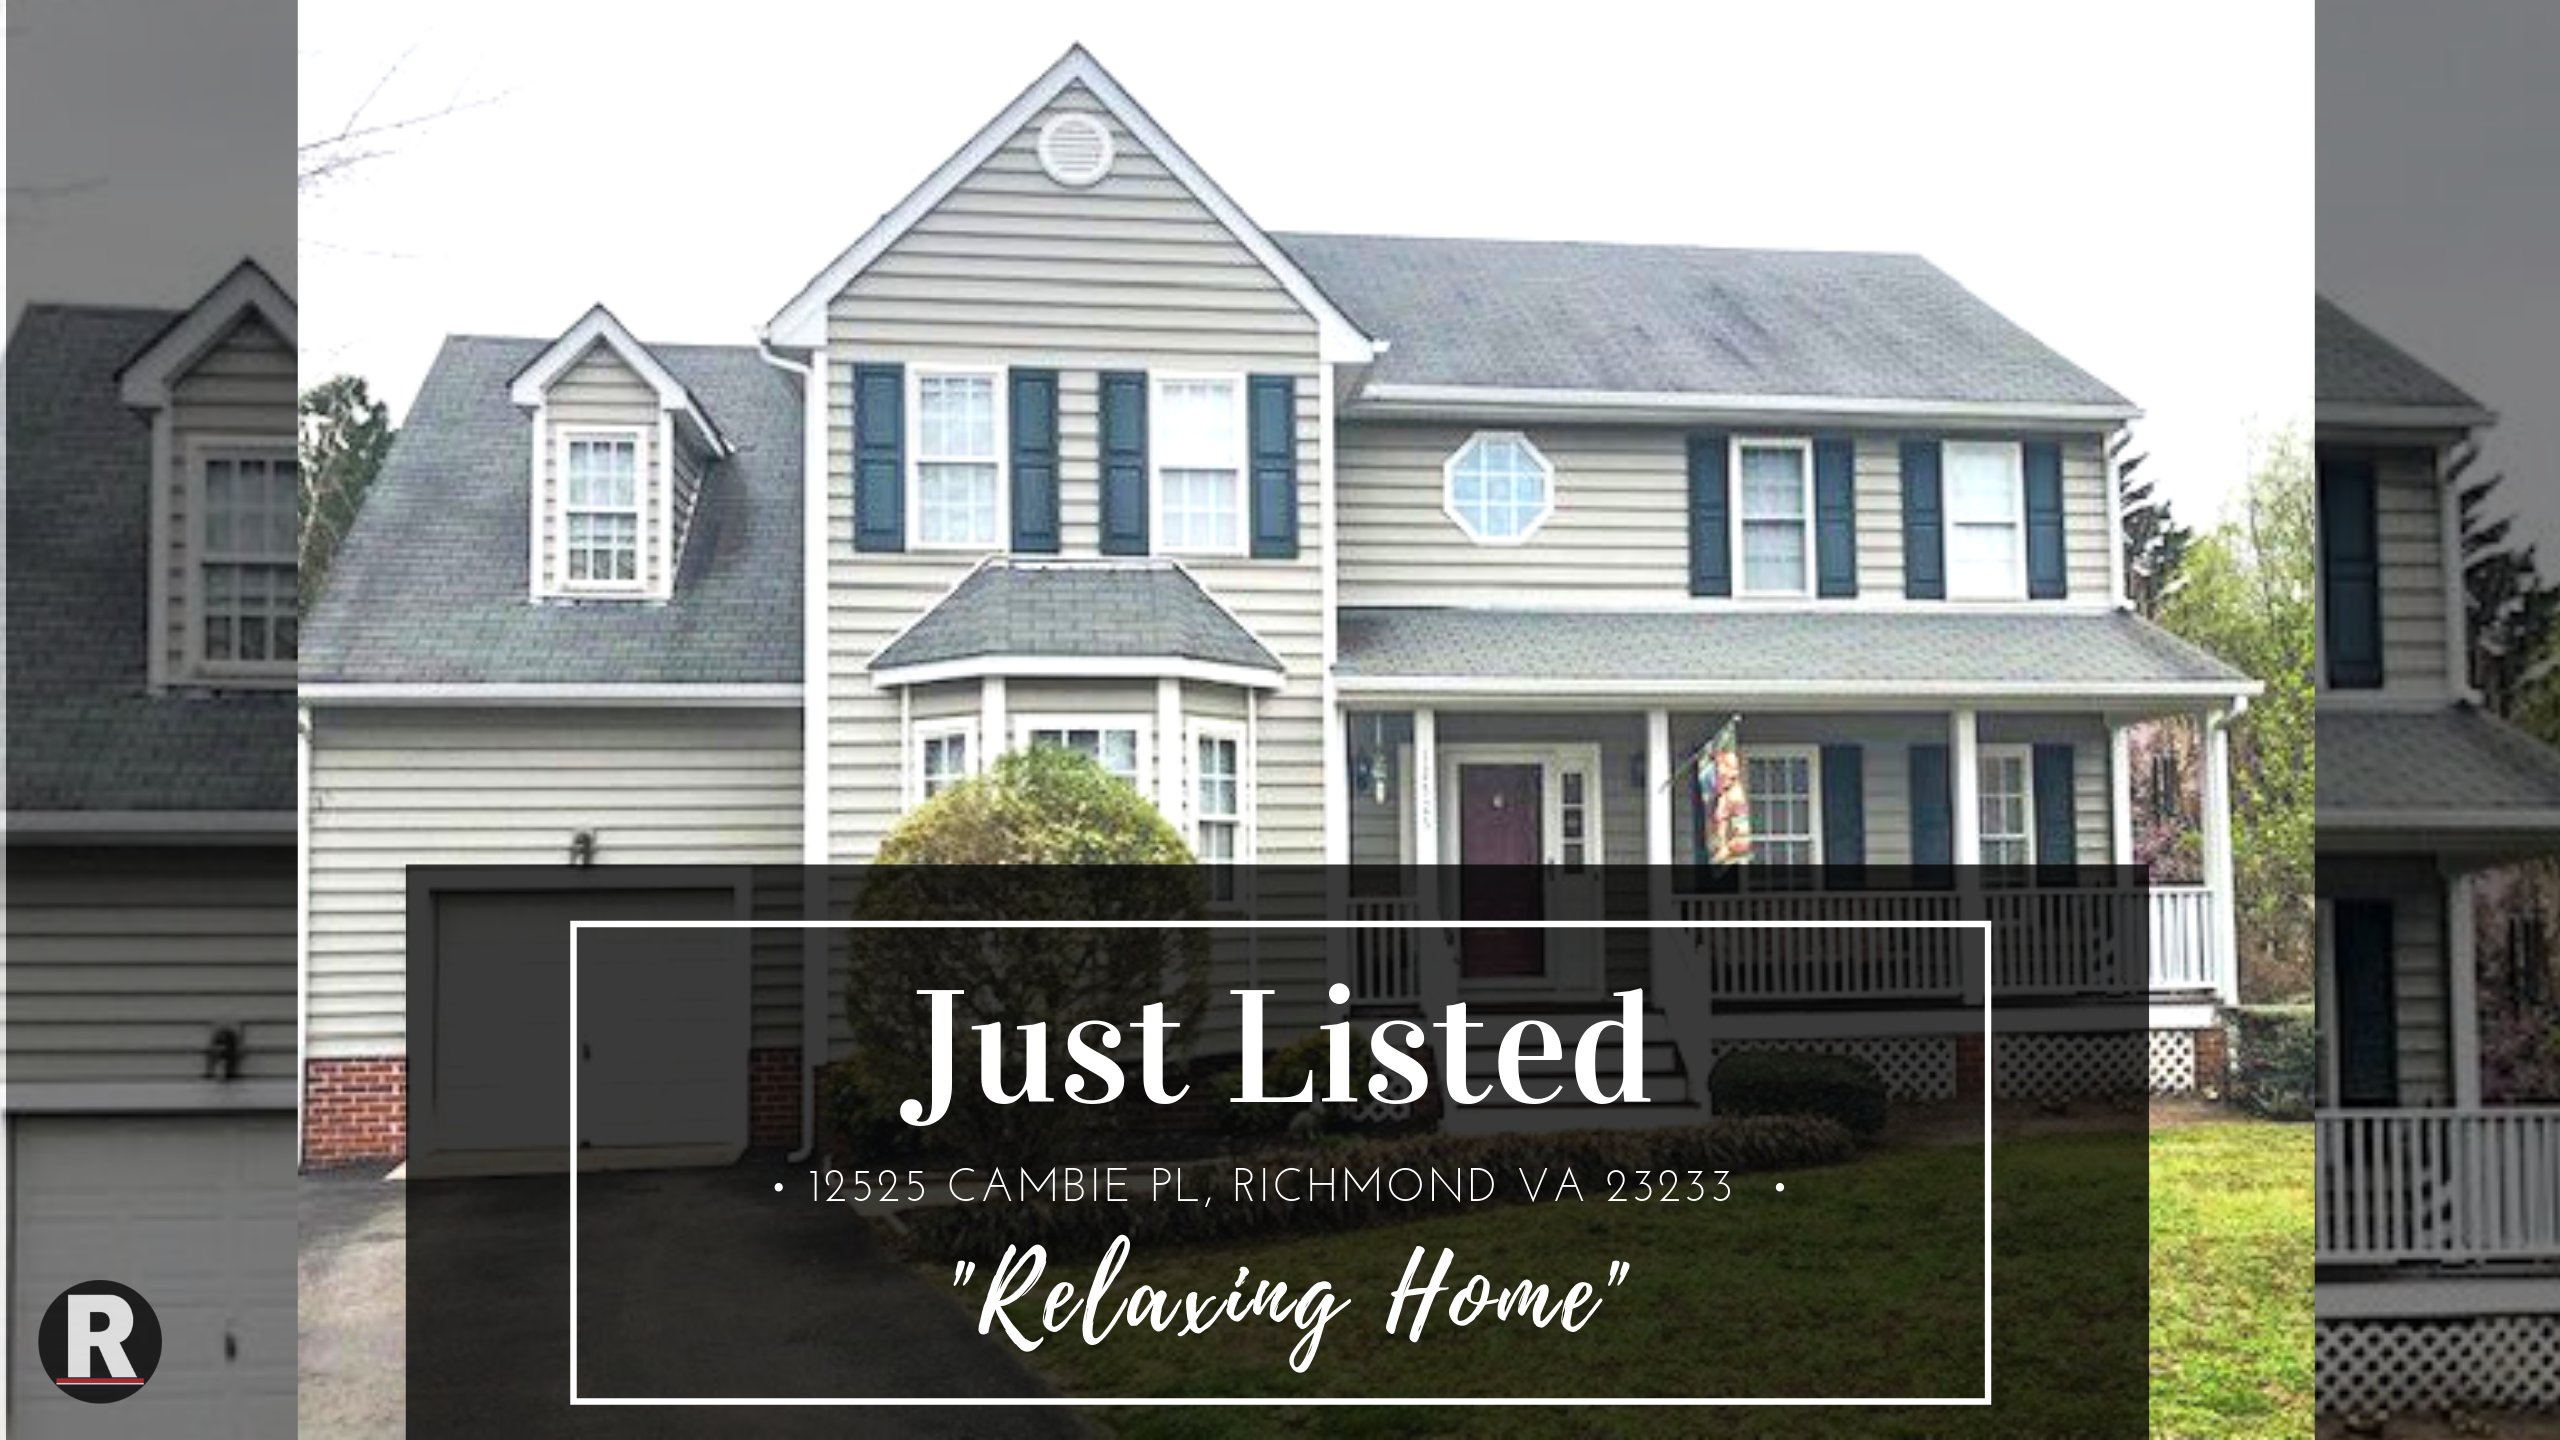 Just Listed! 12525 Cambie Pl, Richmond VA 23233